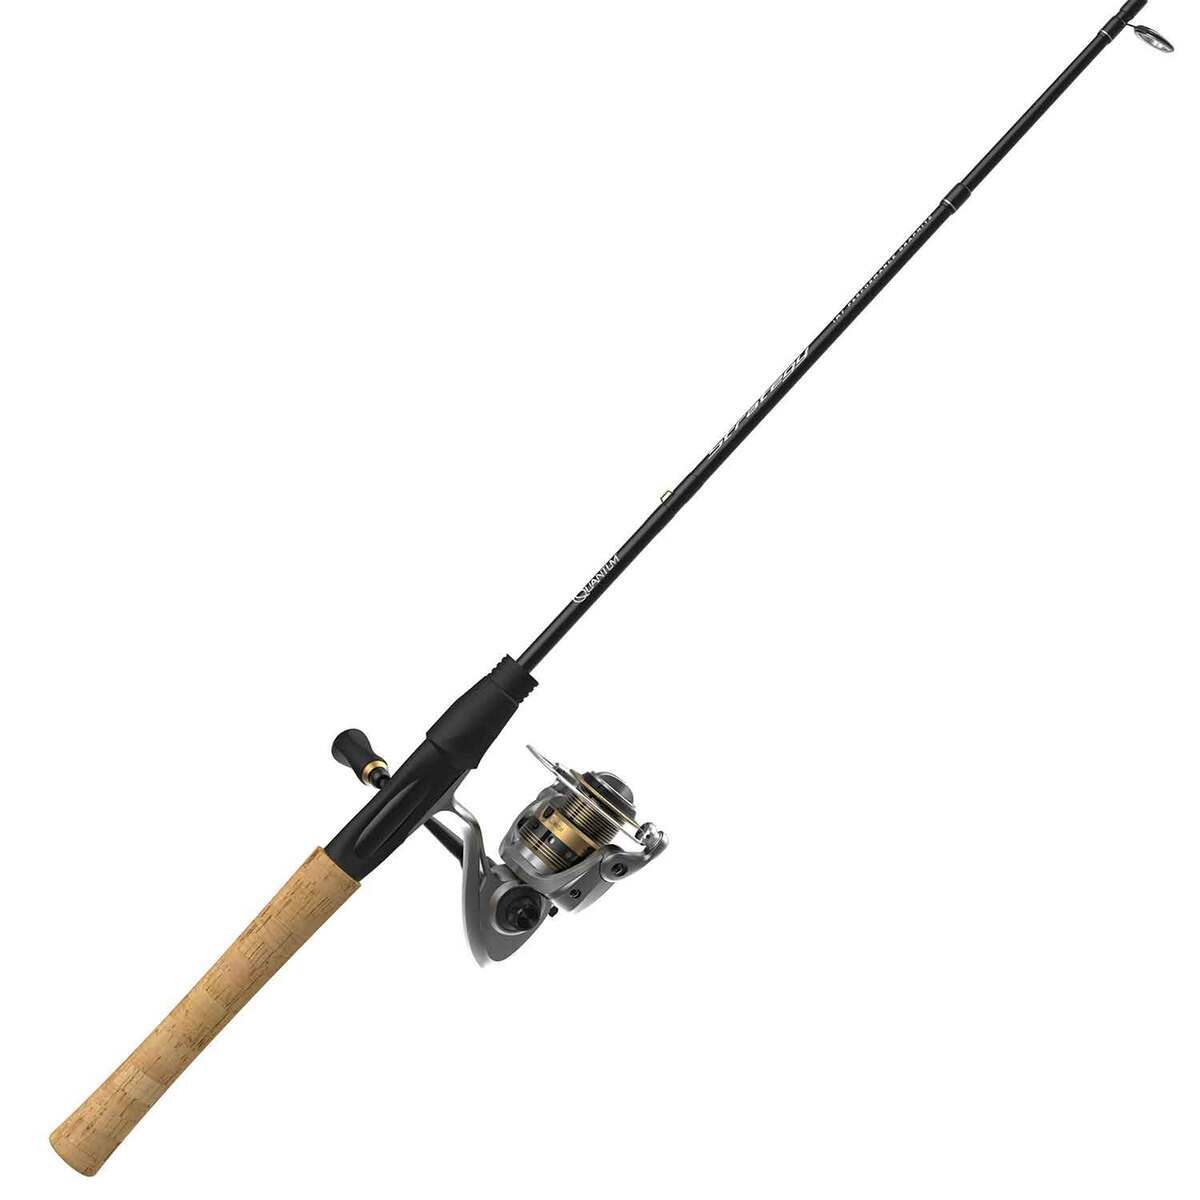 Lew's Spinning Combo Medium Power Fishing Rod & Reel Combos for